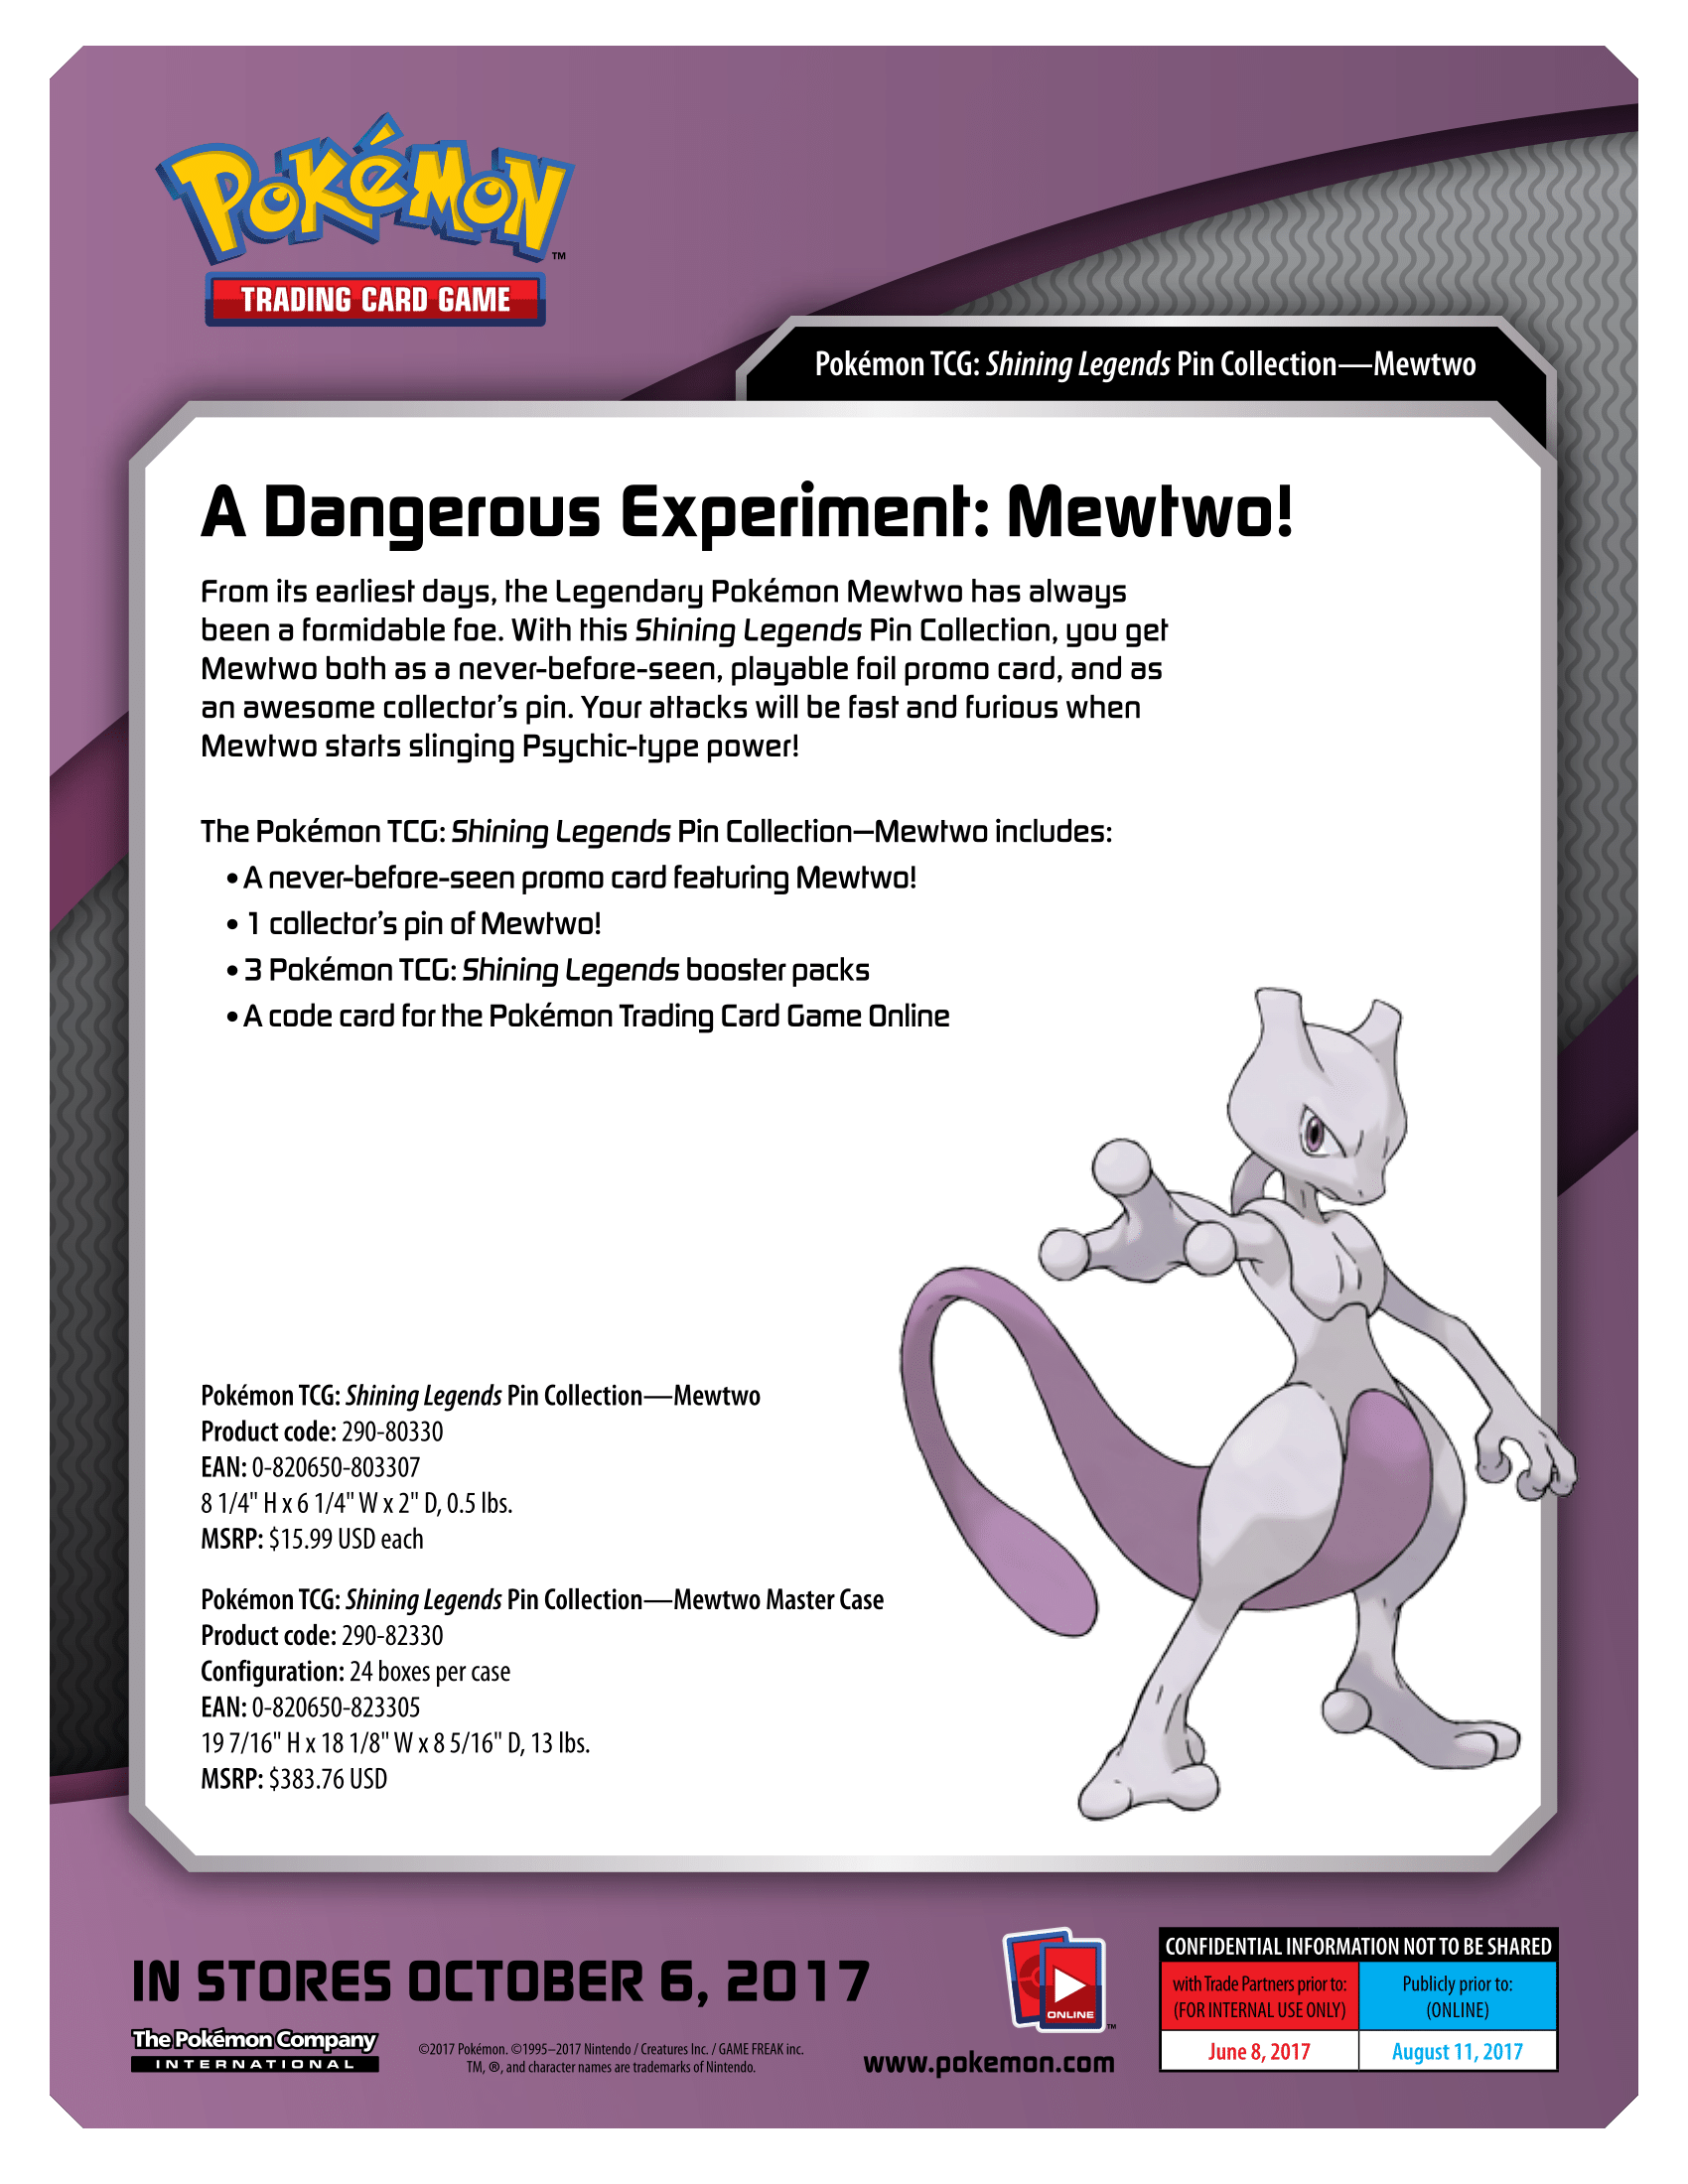 Pokemon TCG Online Shining Legends Pin Collection Mewtwo Code Card.